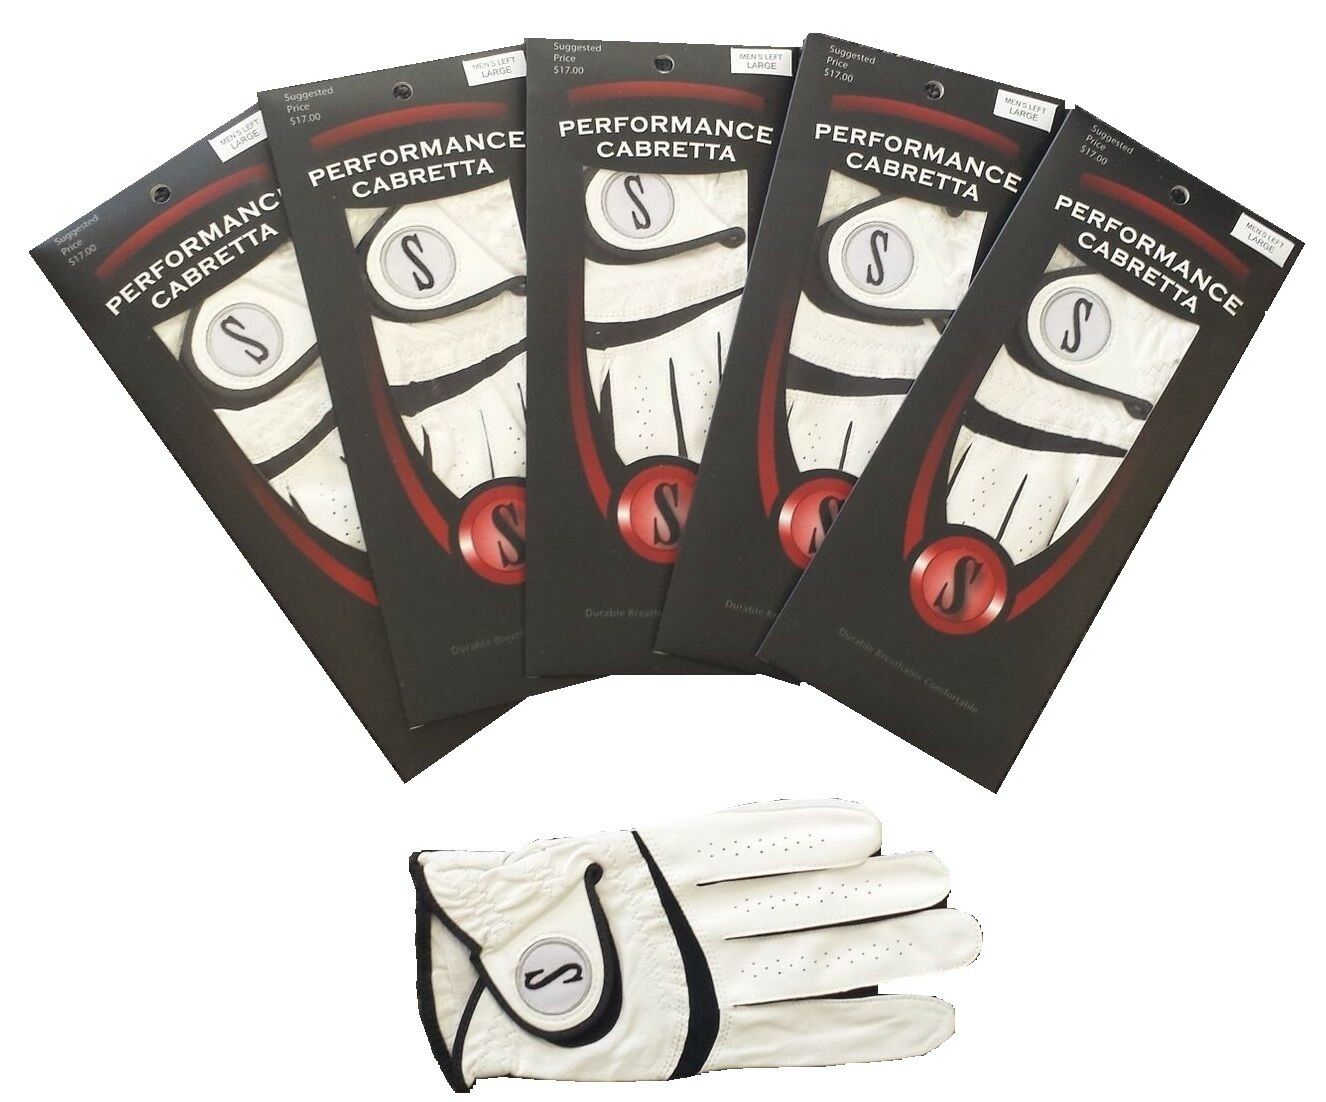 Golf Glove Leather 5 Pack Genuine Performance Cabretta S Leather Free Ship Fast